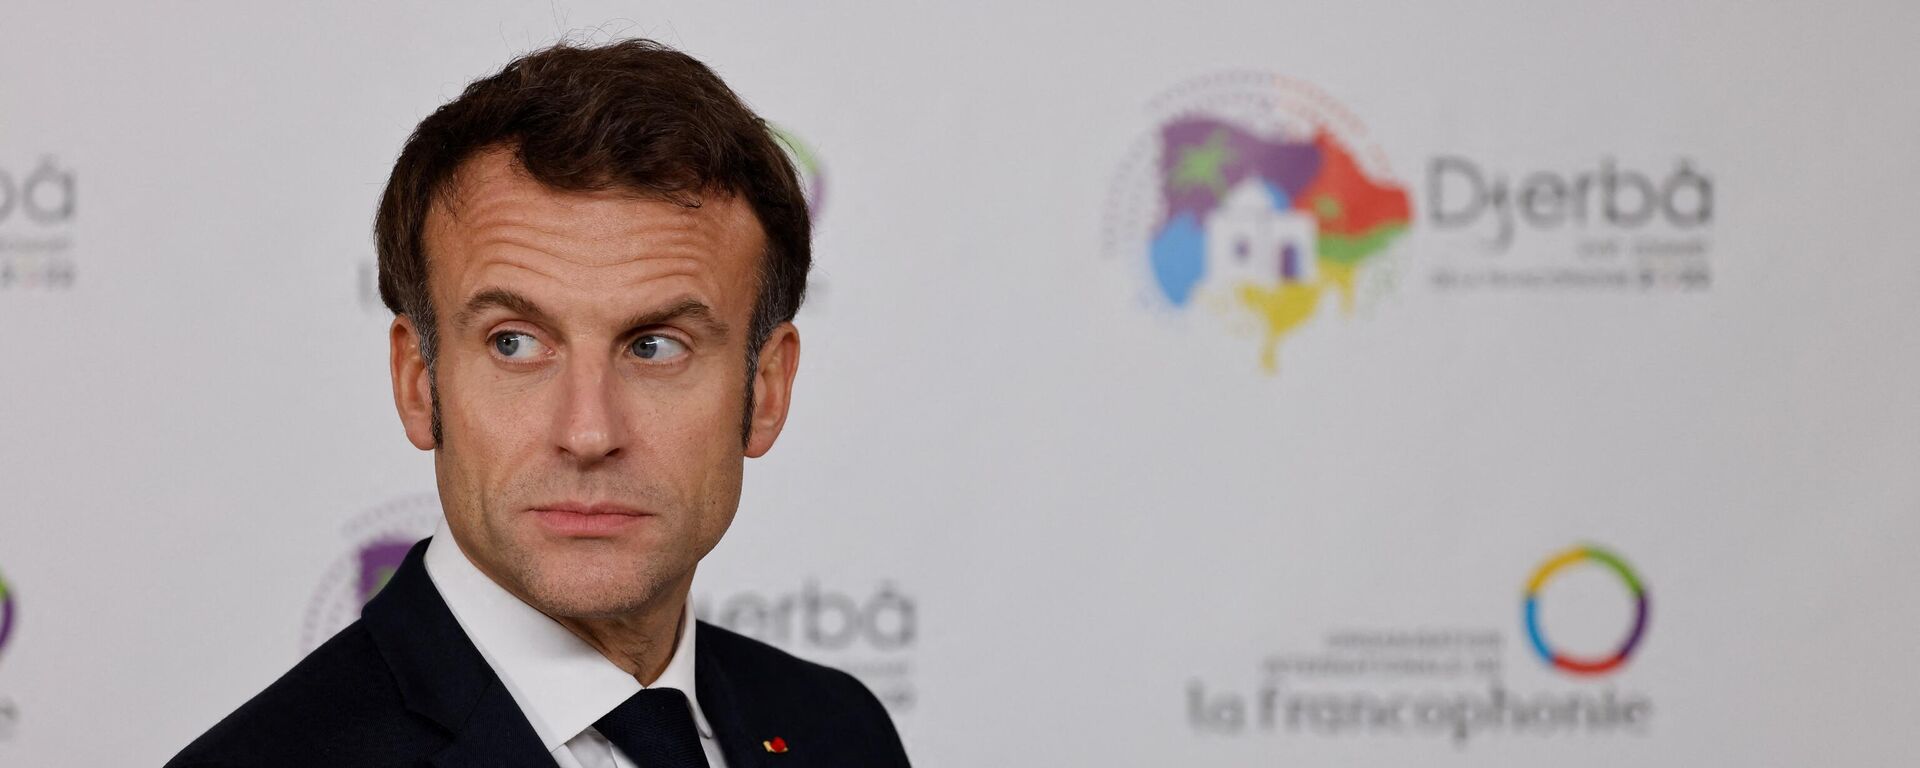 France's President Emmanuel Macron looks on during a bilateral meeting at the 18th Francophone countries Summit in Djerba, on November 19, 2022.  - Sputnik International, 1920, 21.11.2022